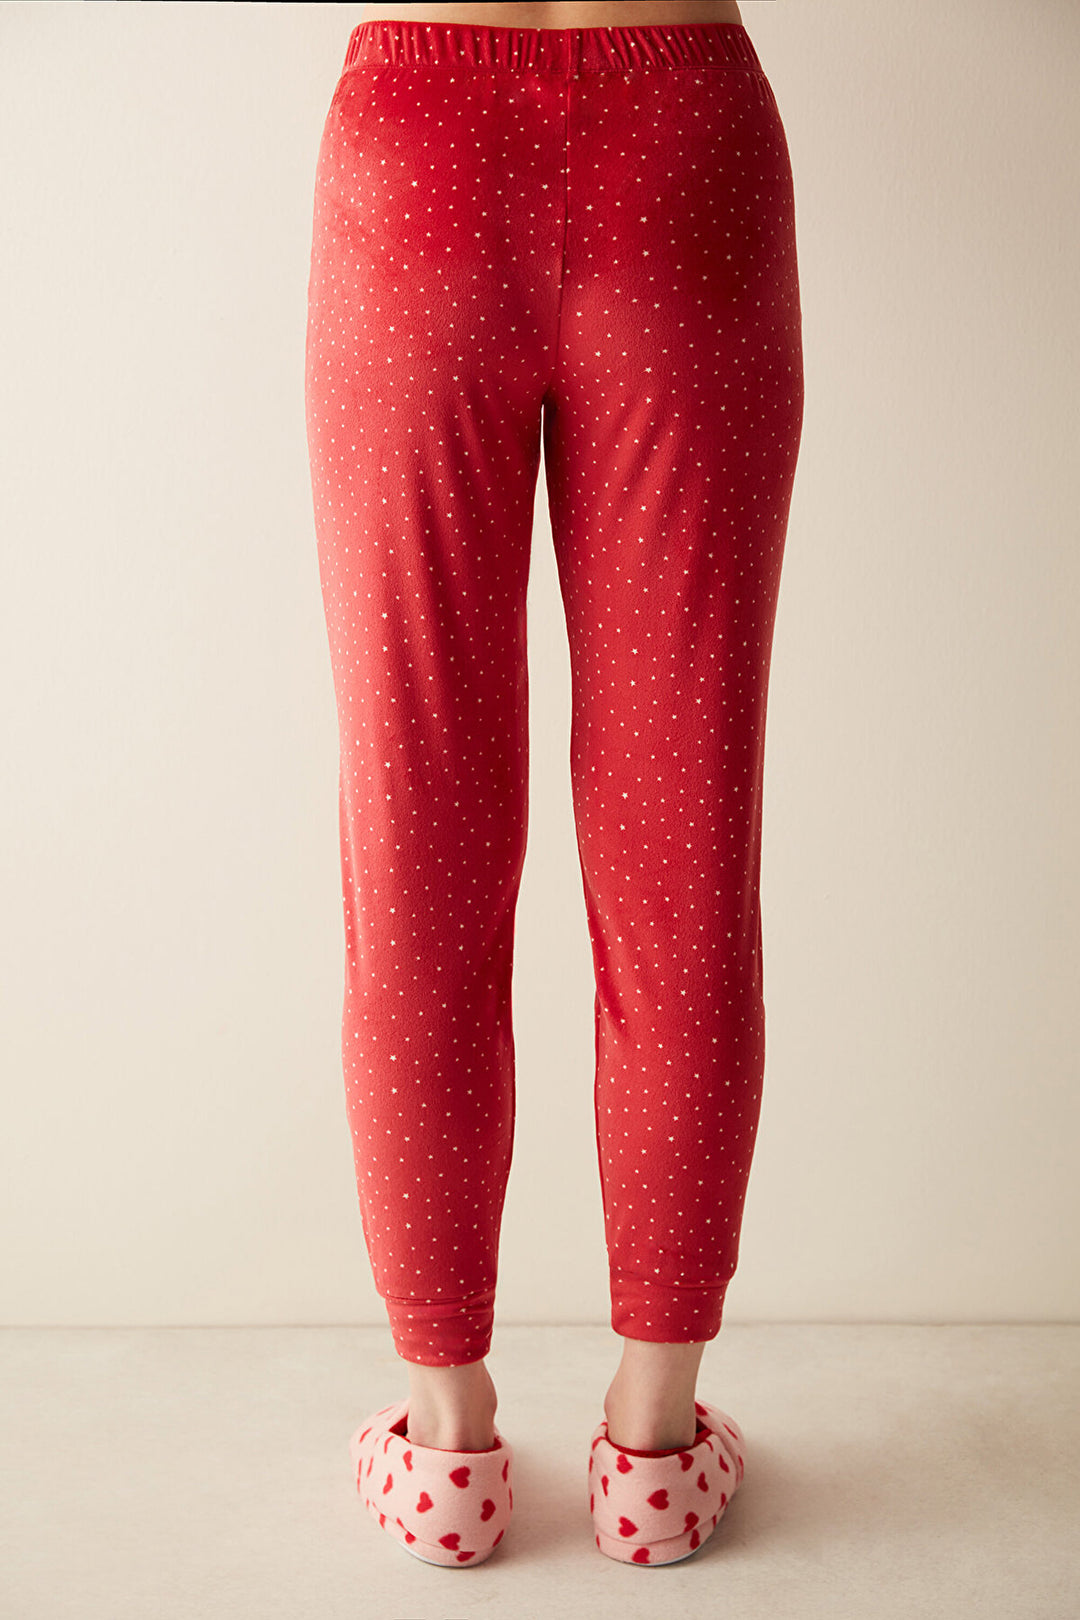 Star Patterned Red Fuzzy Pants Pajama Bottoms